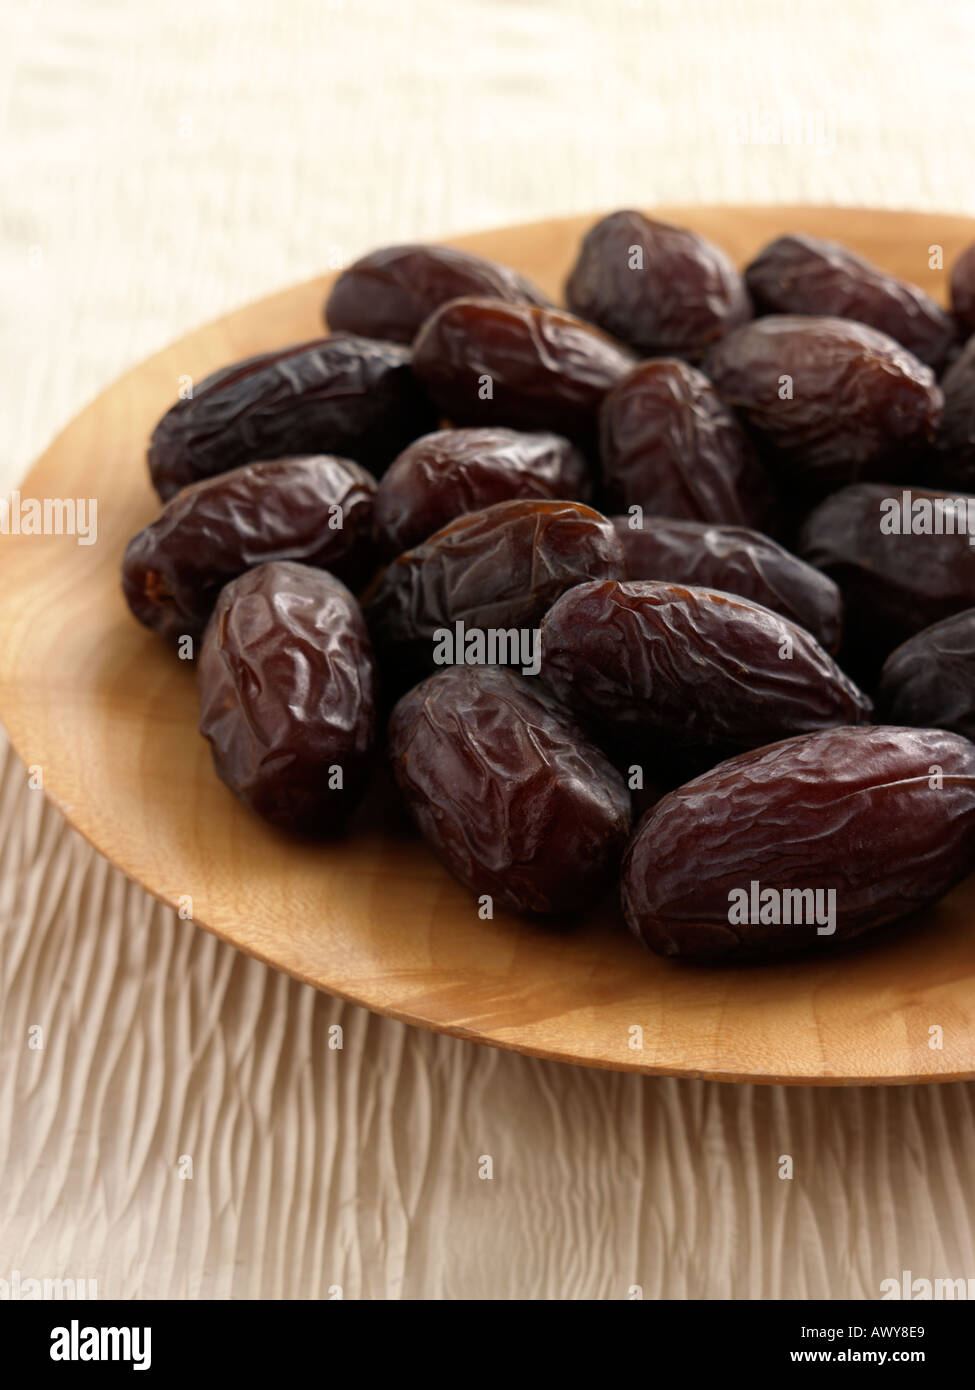 edible fruit of the date palm Dates ripen in four stages which are known by  their arabic names kimri unripe khalal full s Stock Photo - Alamy